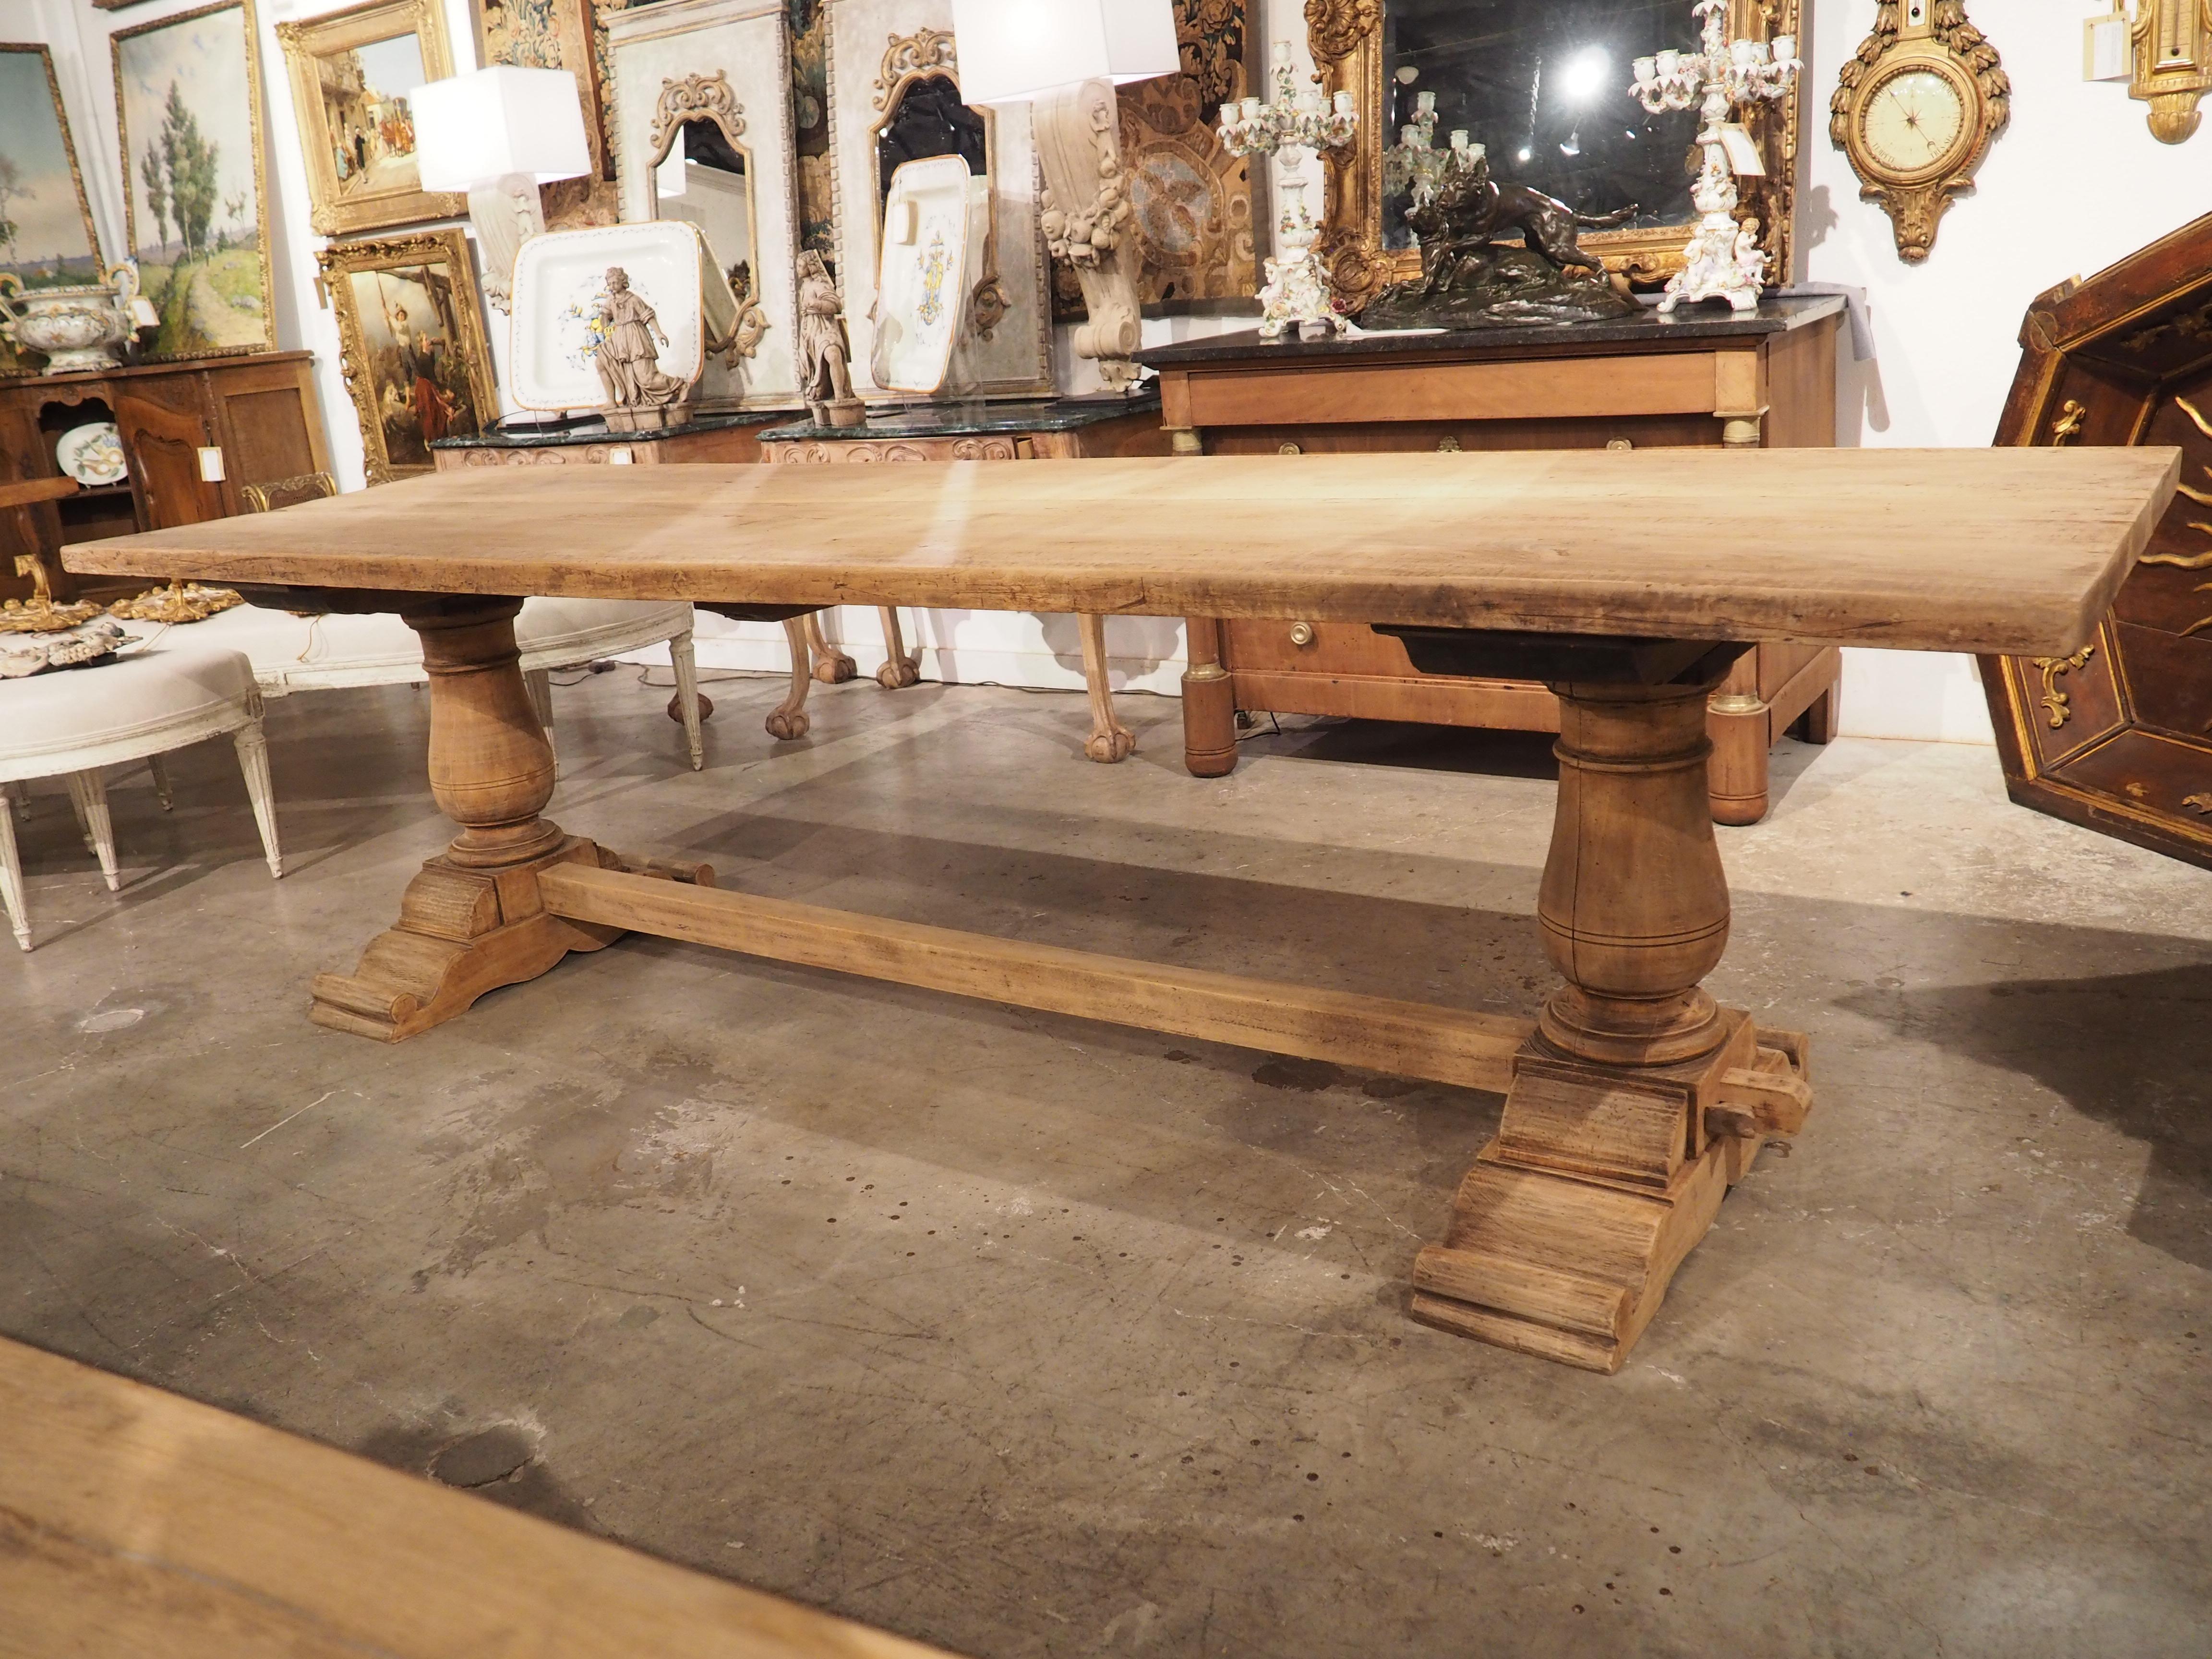 Early 20th Century Antique Tuscan Walnut and Oak Dining Table, Circa 1900